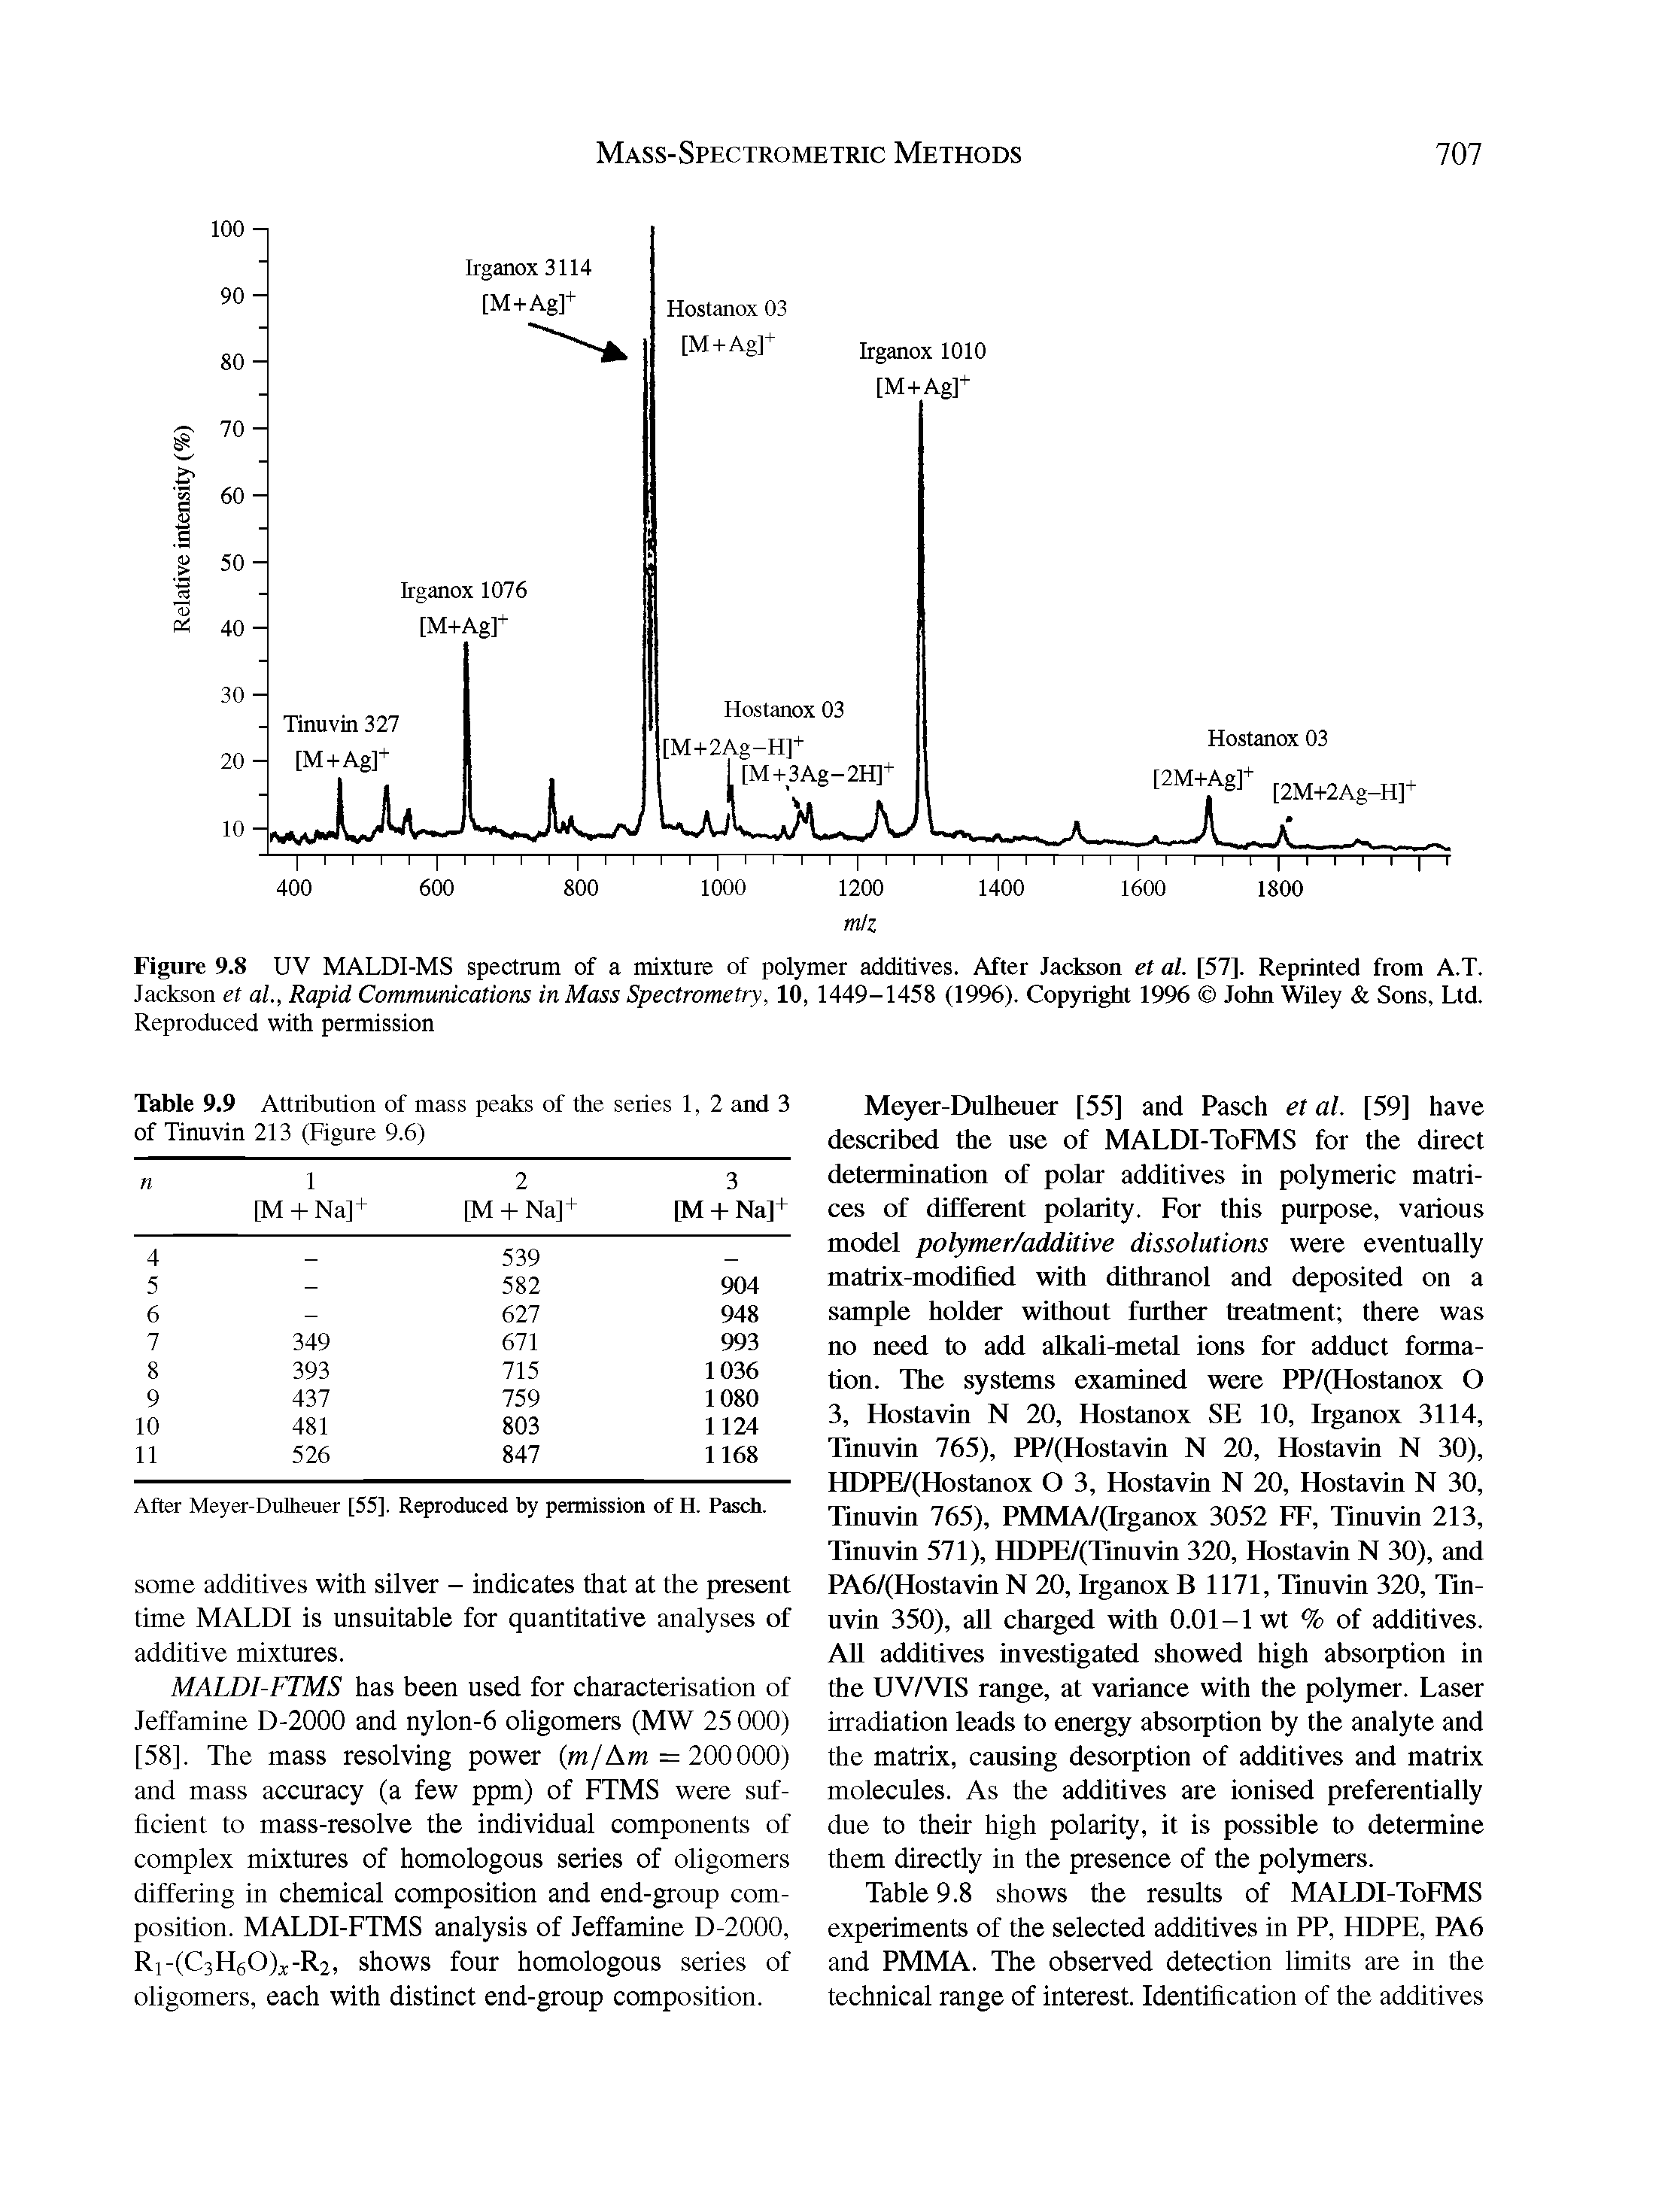 Figure 9.8 UV MALDI-MS spectrum of a mixture of polymer additives. After Jackson et al. [57]. Reprinted from A.T. Jackson et al., Rapid Communications in Mass Spectrometry, 10, 1449-1458 (1996). Copyright 1996 John Wiley Sons, Ltd. Reproduced with permission...